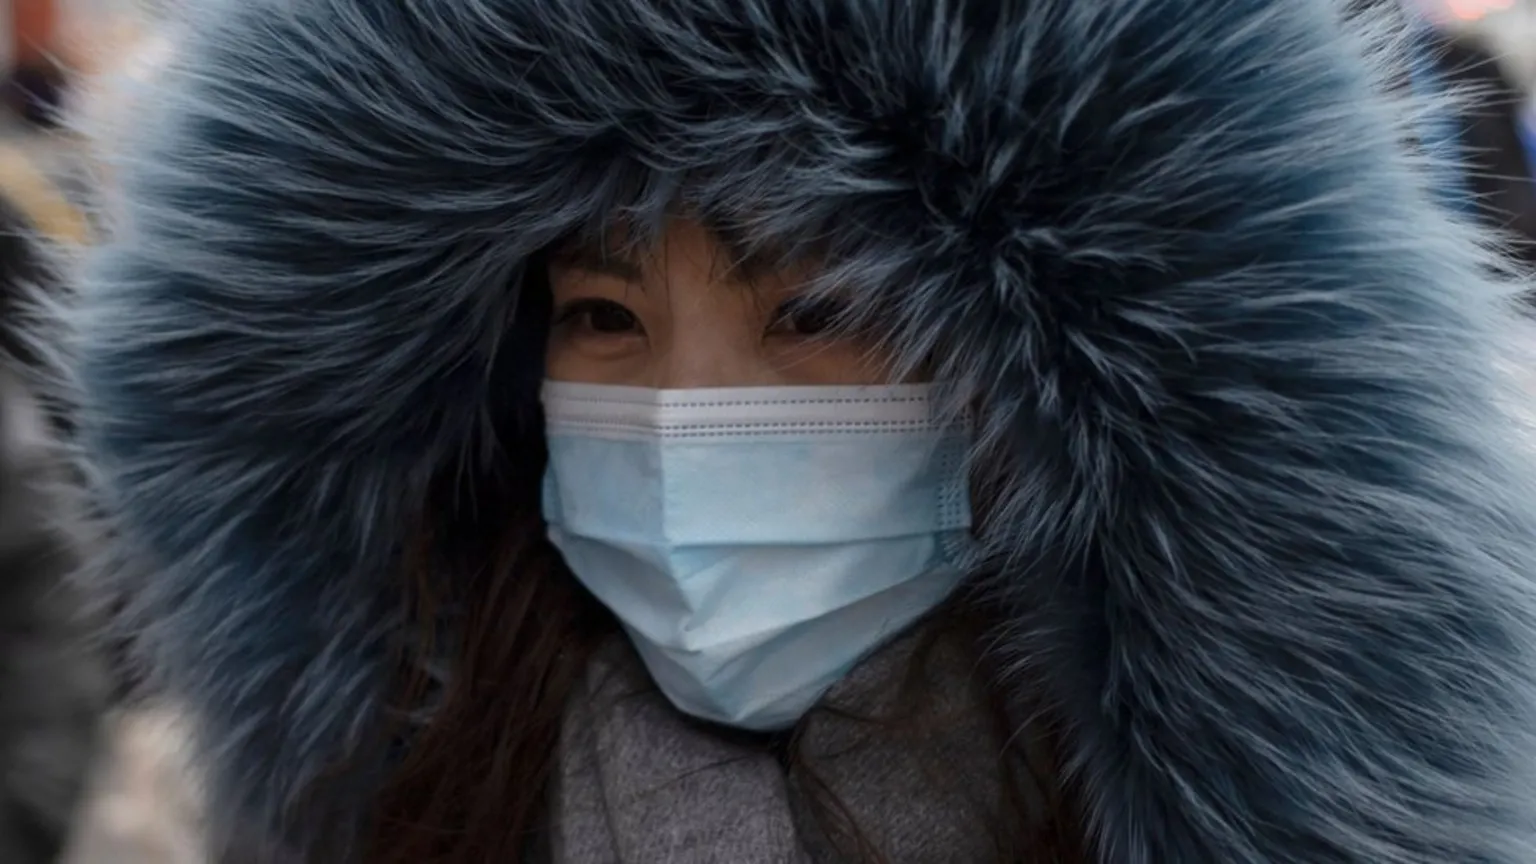 Beijing shivers through coldest December on record (bbc.com)